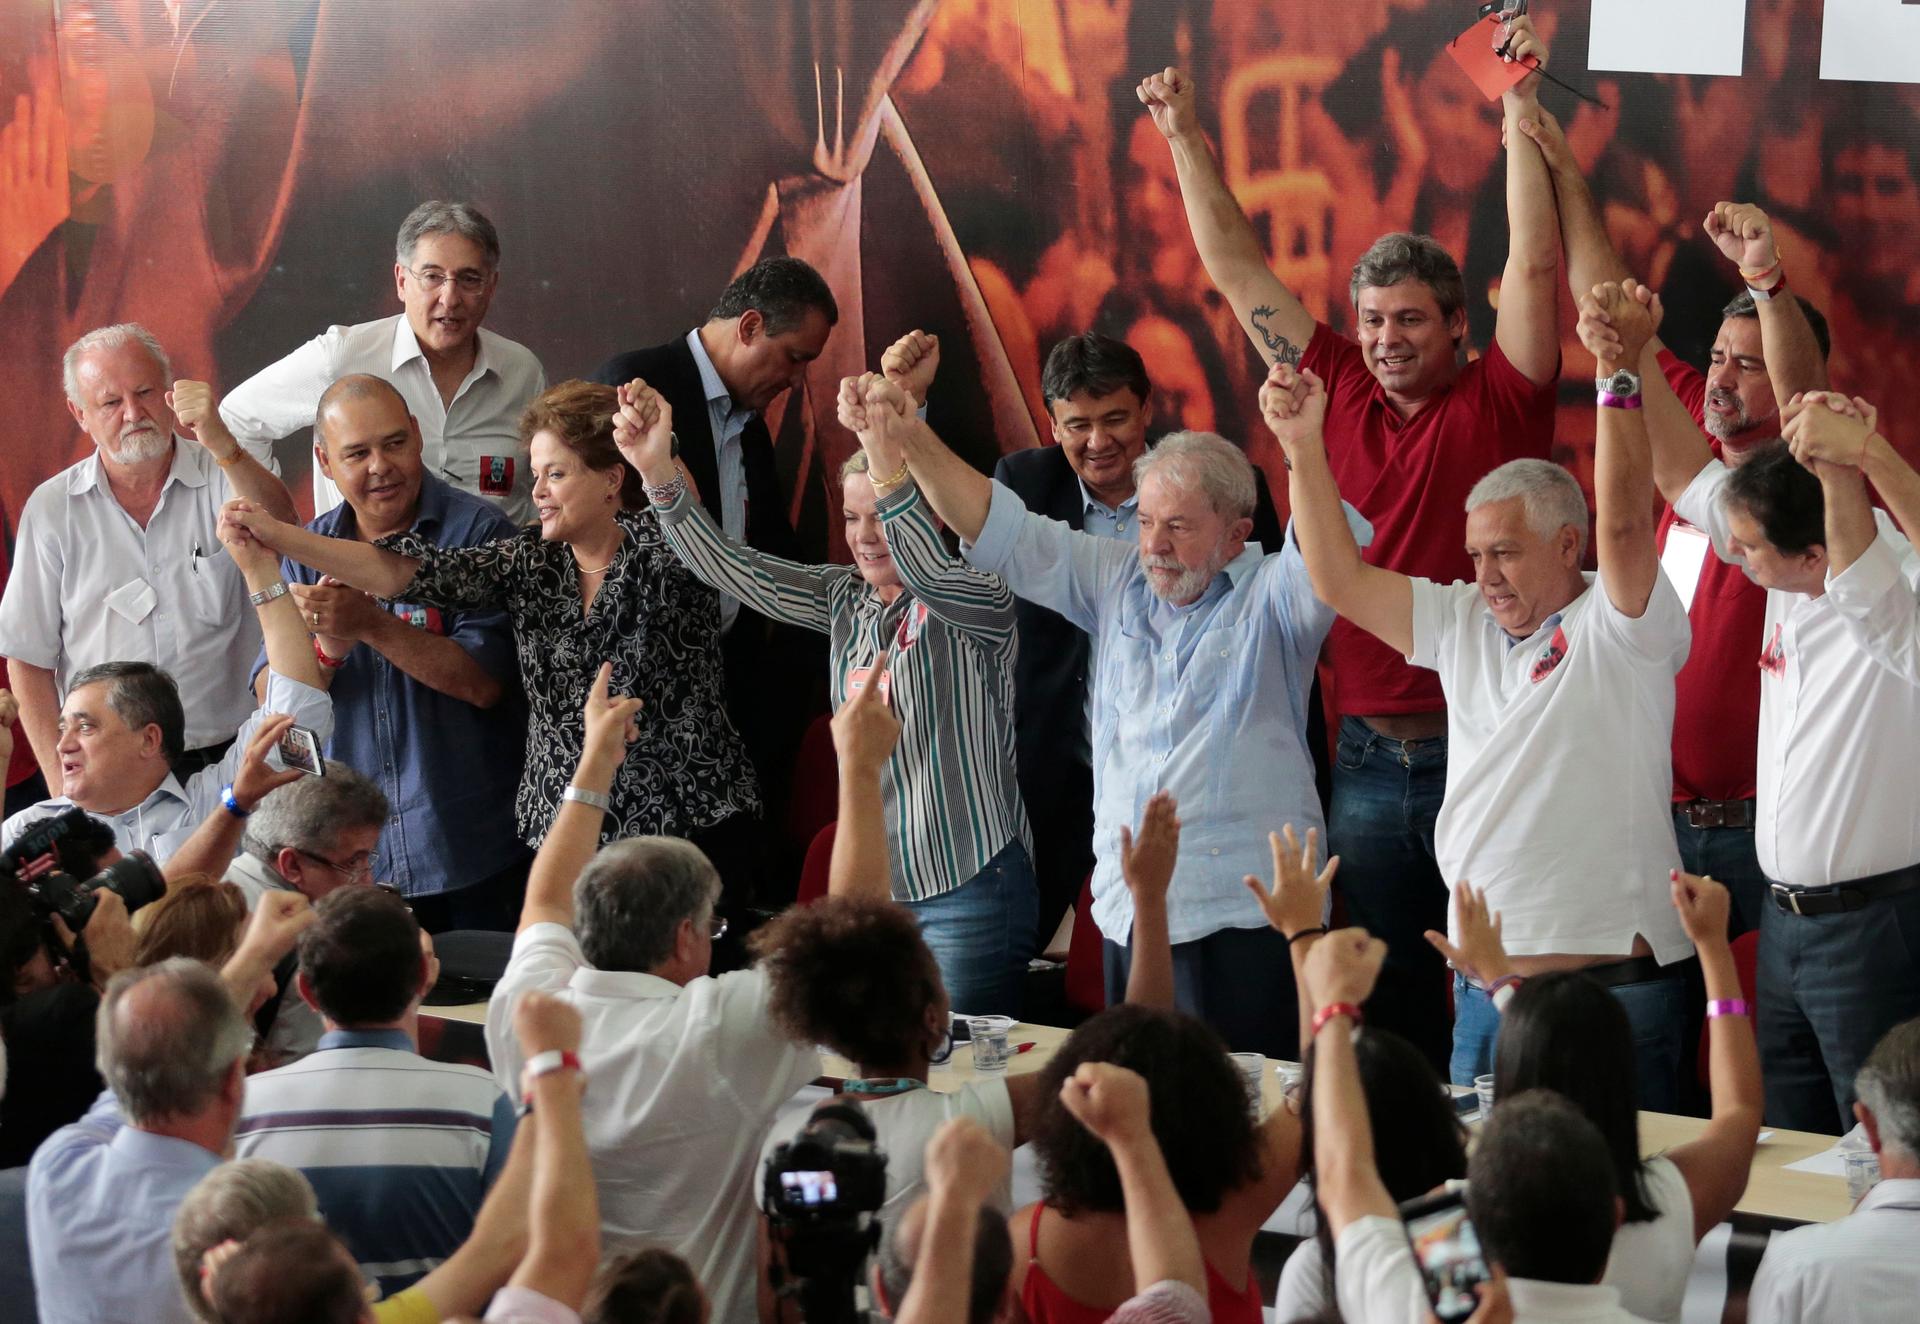 Former Brazilian president Luiz Inacio Lula da Silva attends a meeting with members of the Workers Party that decided Lula da Silva will be its candidate again in the 2018 election, despite losing an appeal against a corruption conviction that will likely